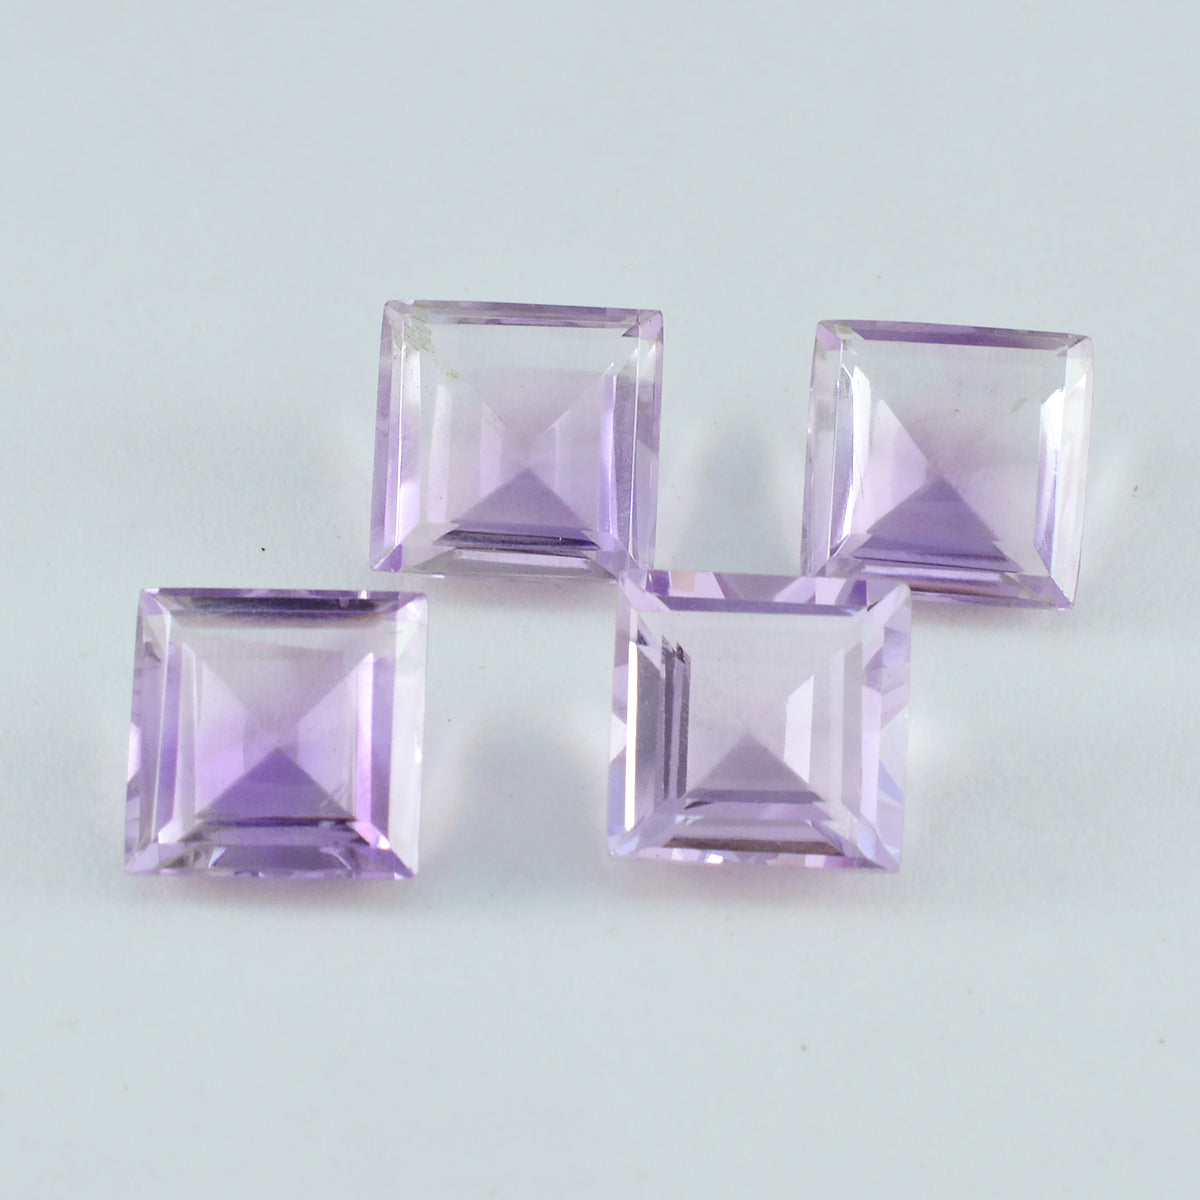 Riyogems 1PC Natural Purple Amethyst Faceted 14x14 mm Square Shape excellent Quality Loose Gemstone